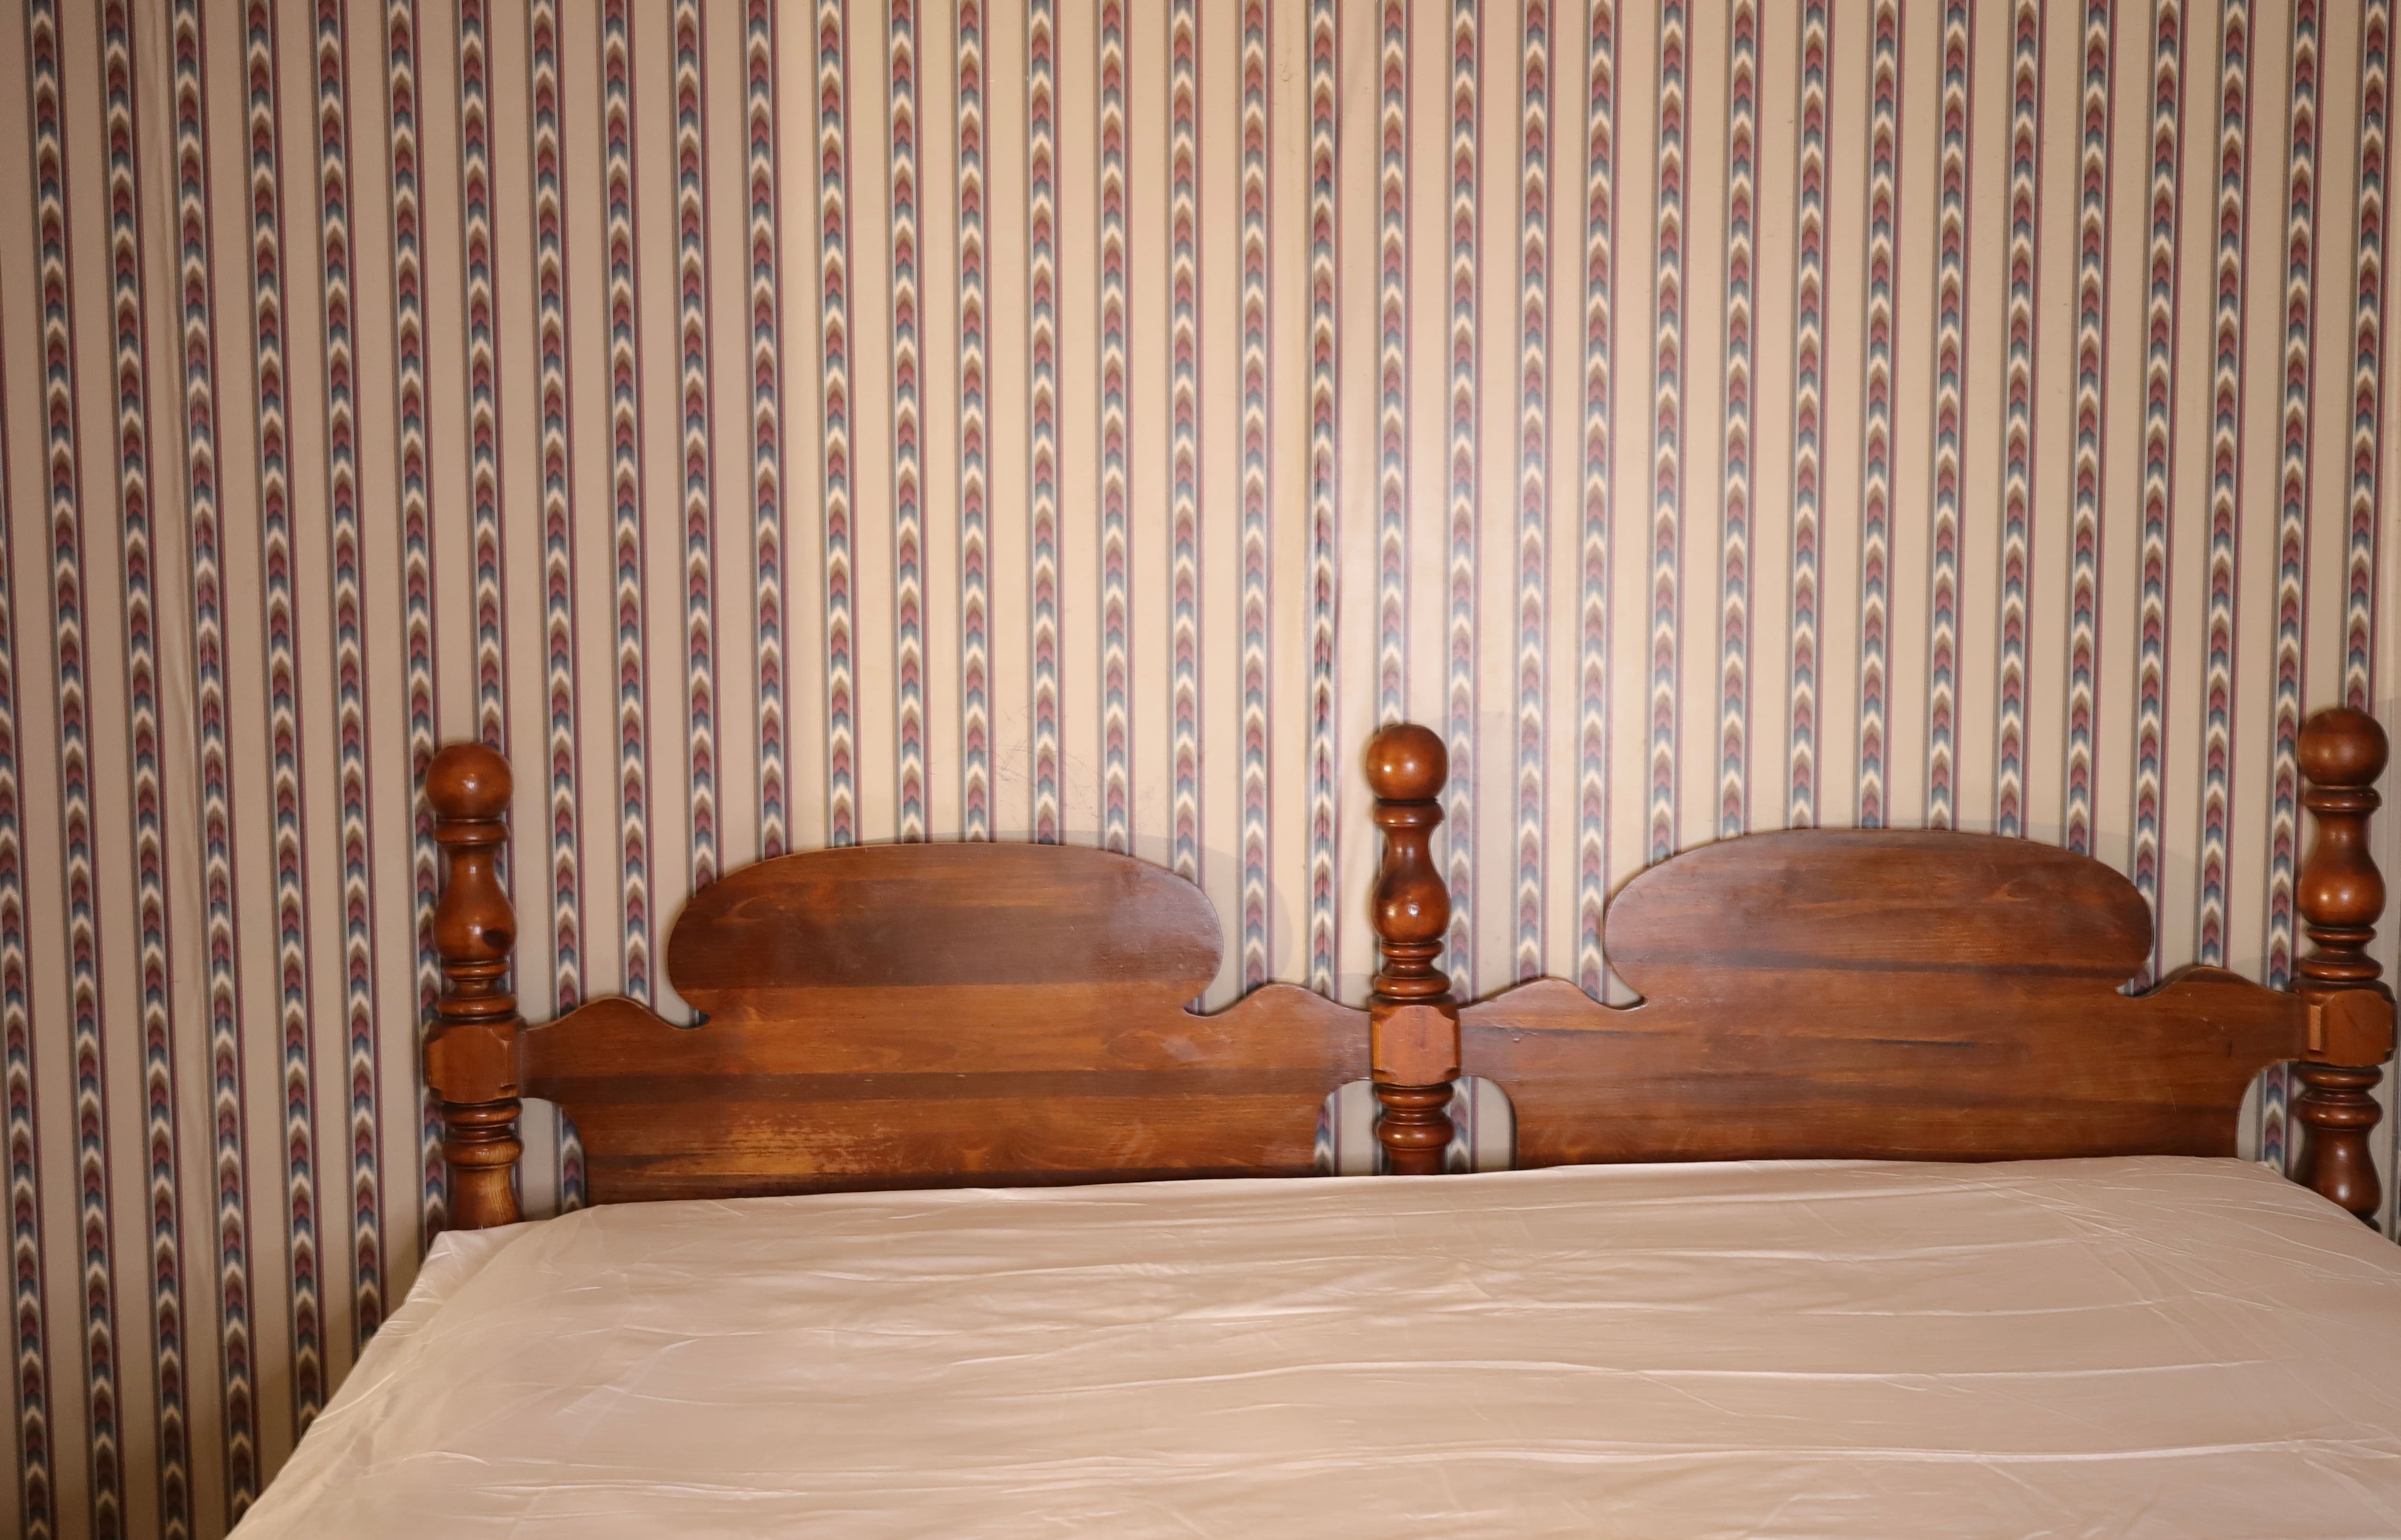 Before photo of a bedroom with brown patterned wallpaper and a wooden headboard.